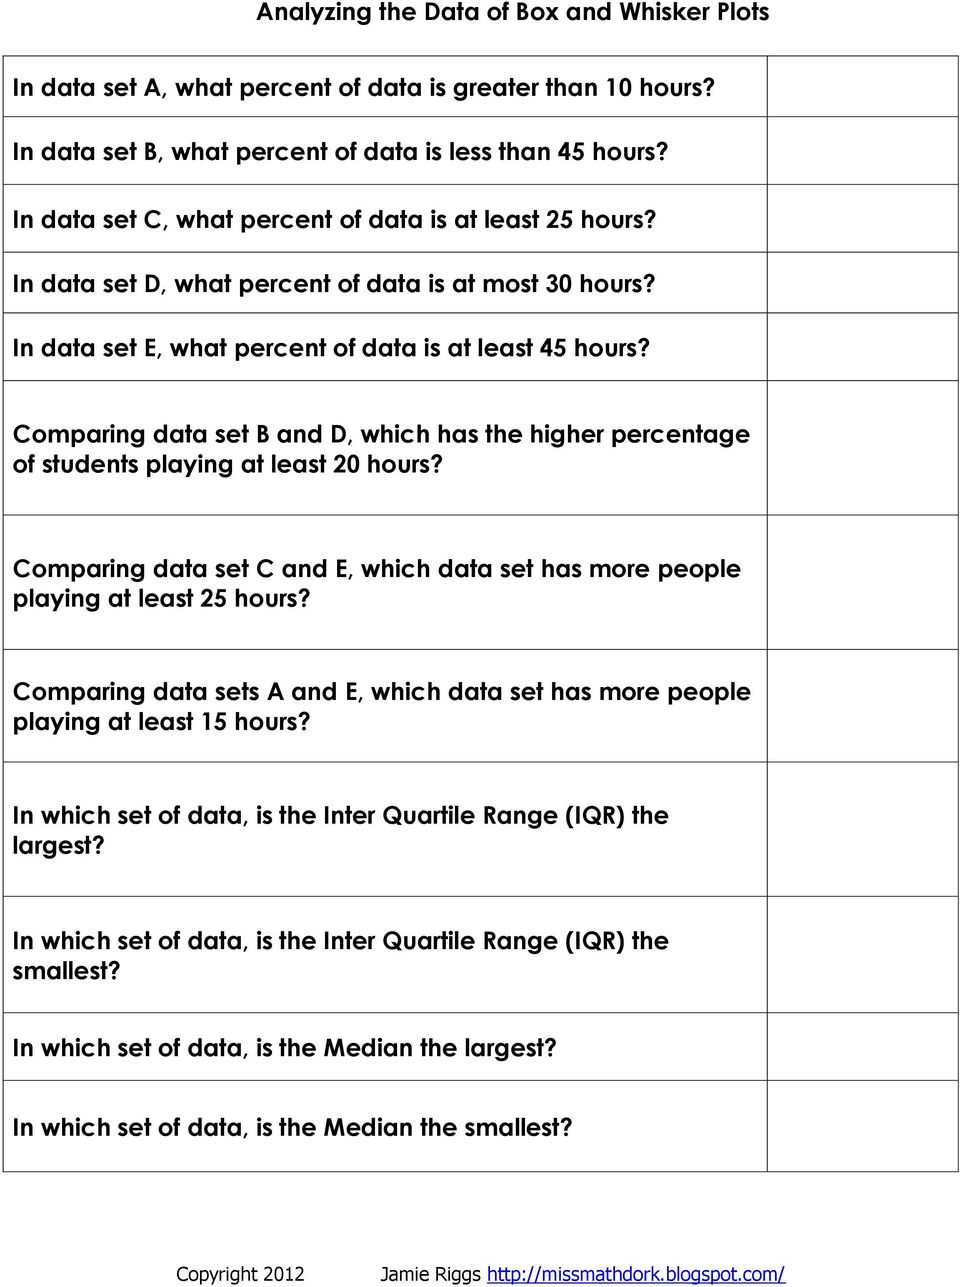 Comparing data set B and D, which has the higher percentage of students playing at least 20 hours? Comparing data set C and E, which data set has more people playing at least 25 hours?